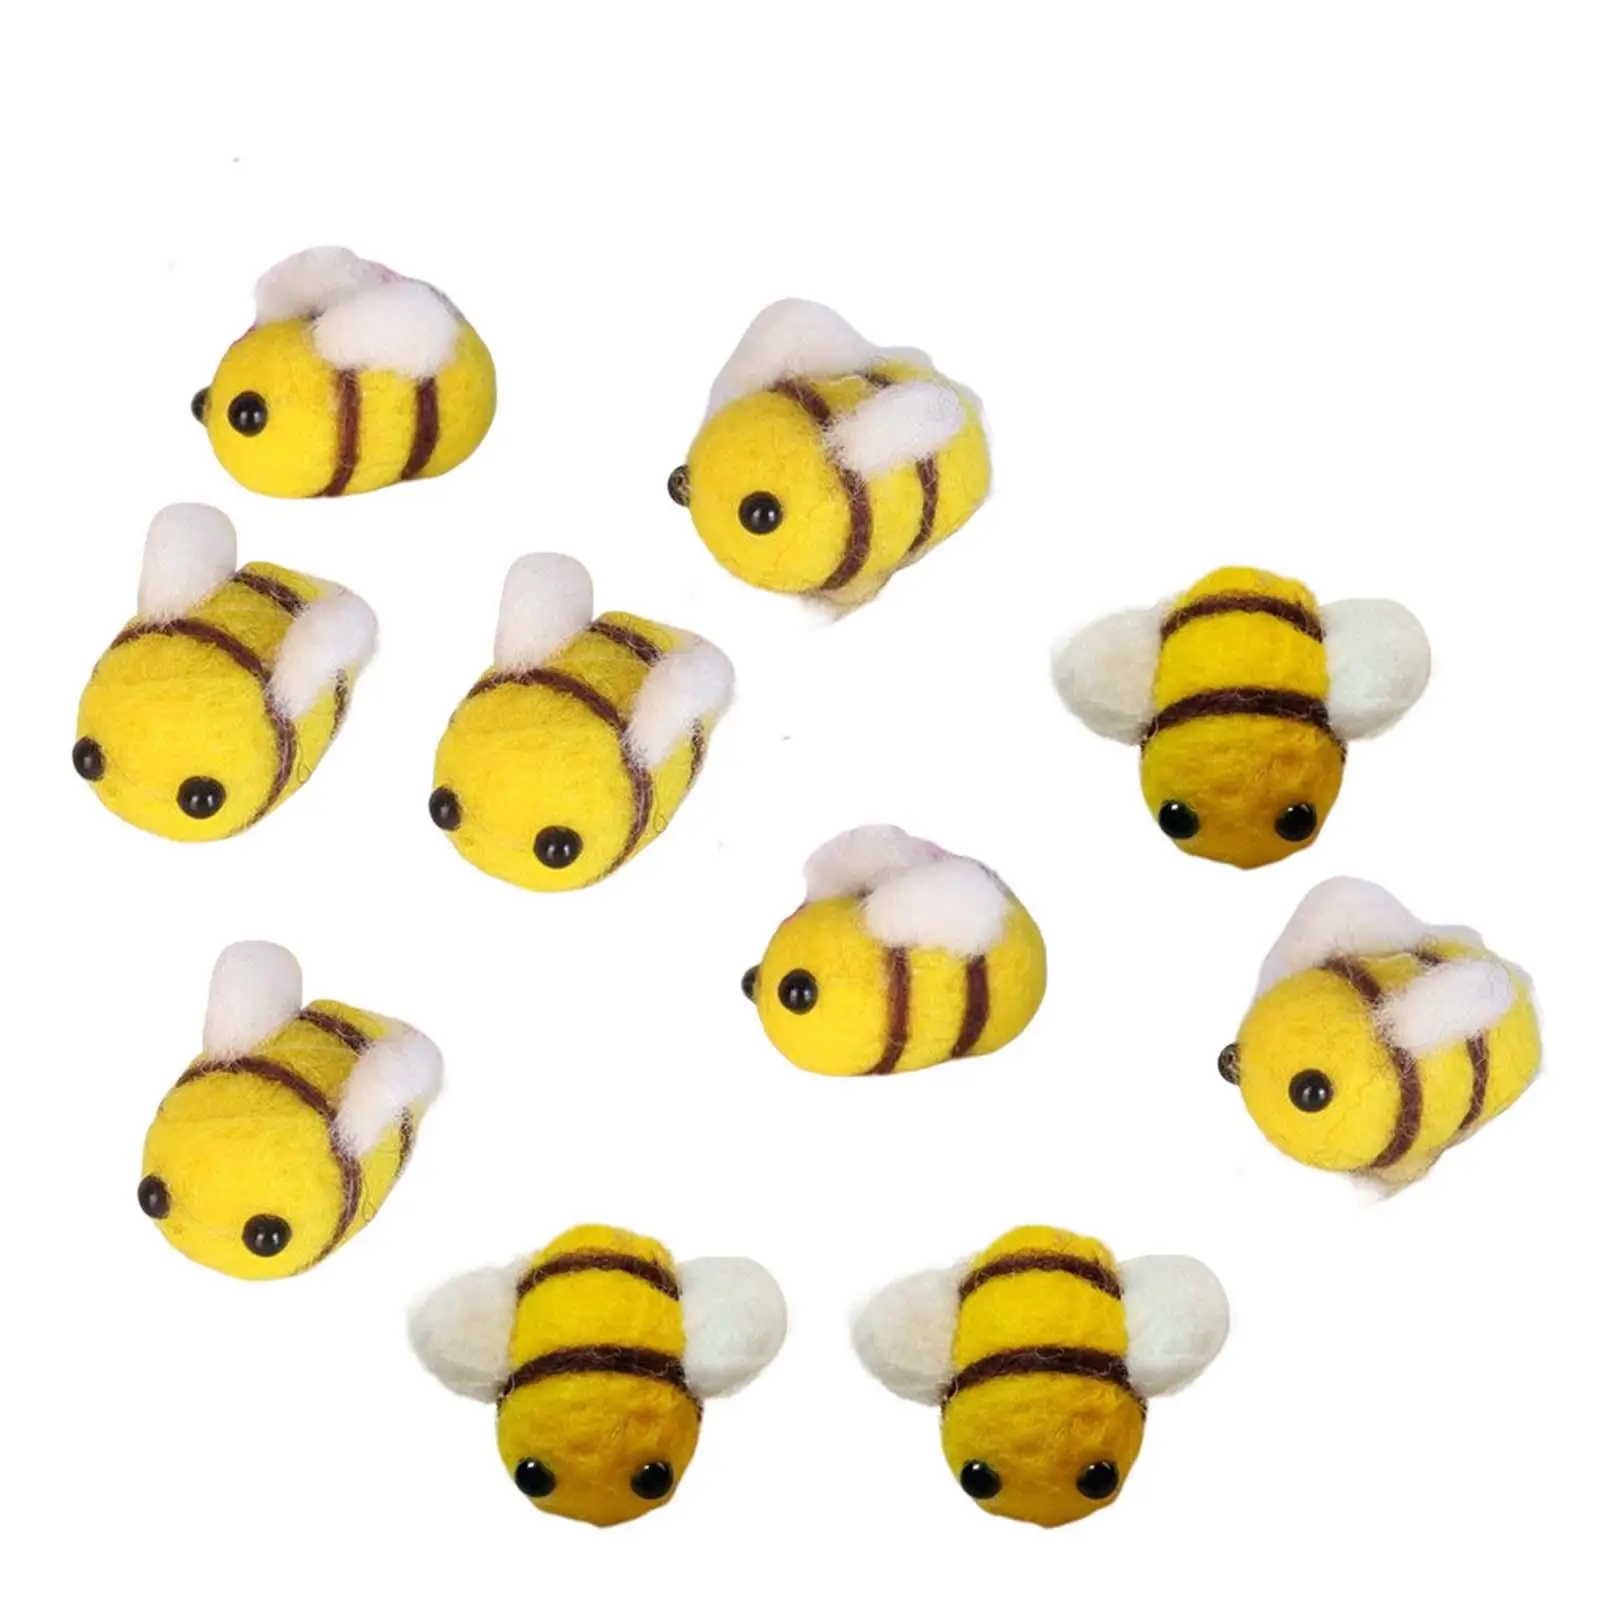 10 Pieces Bumble Bee Ornament DIY Crafts for Christmas Hair Accessories